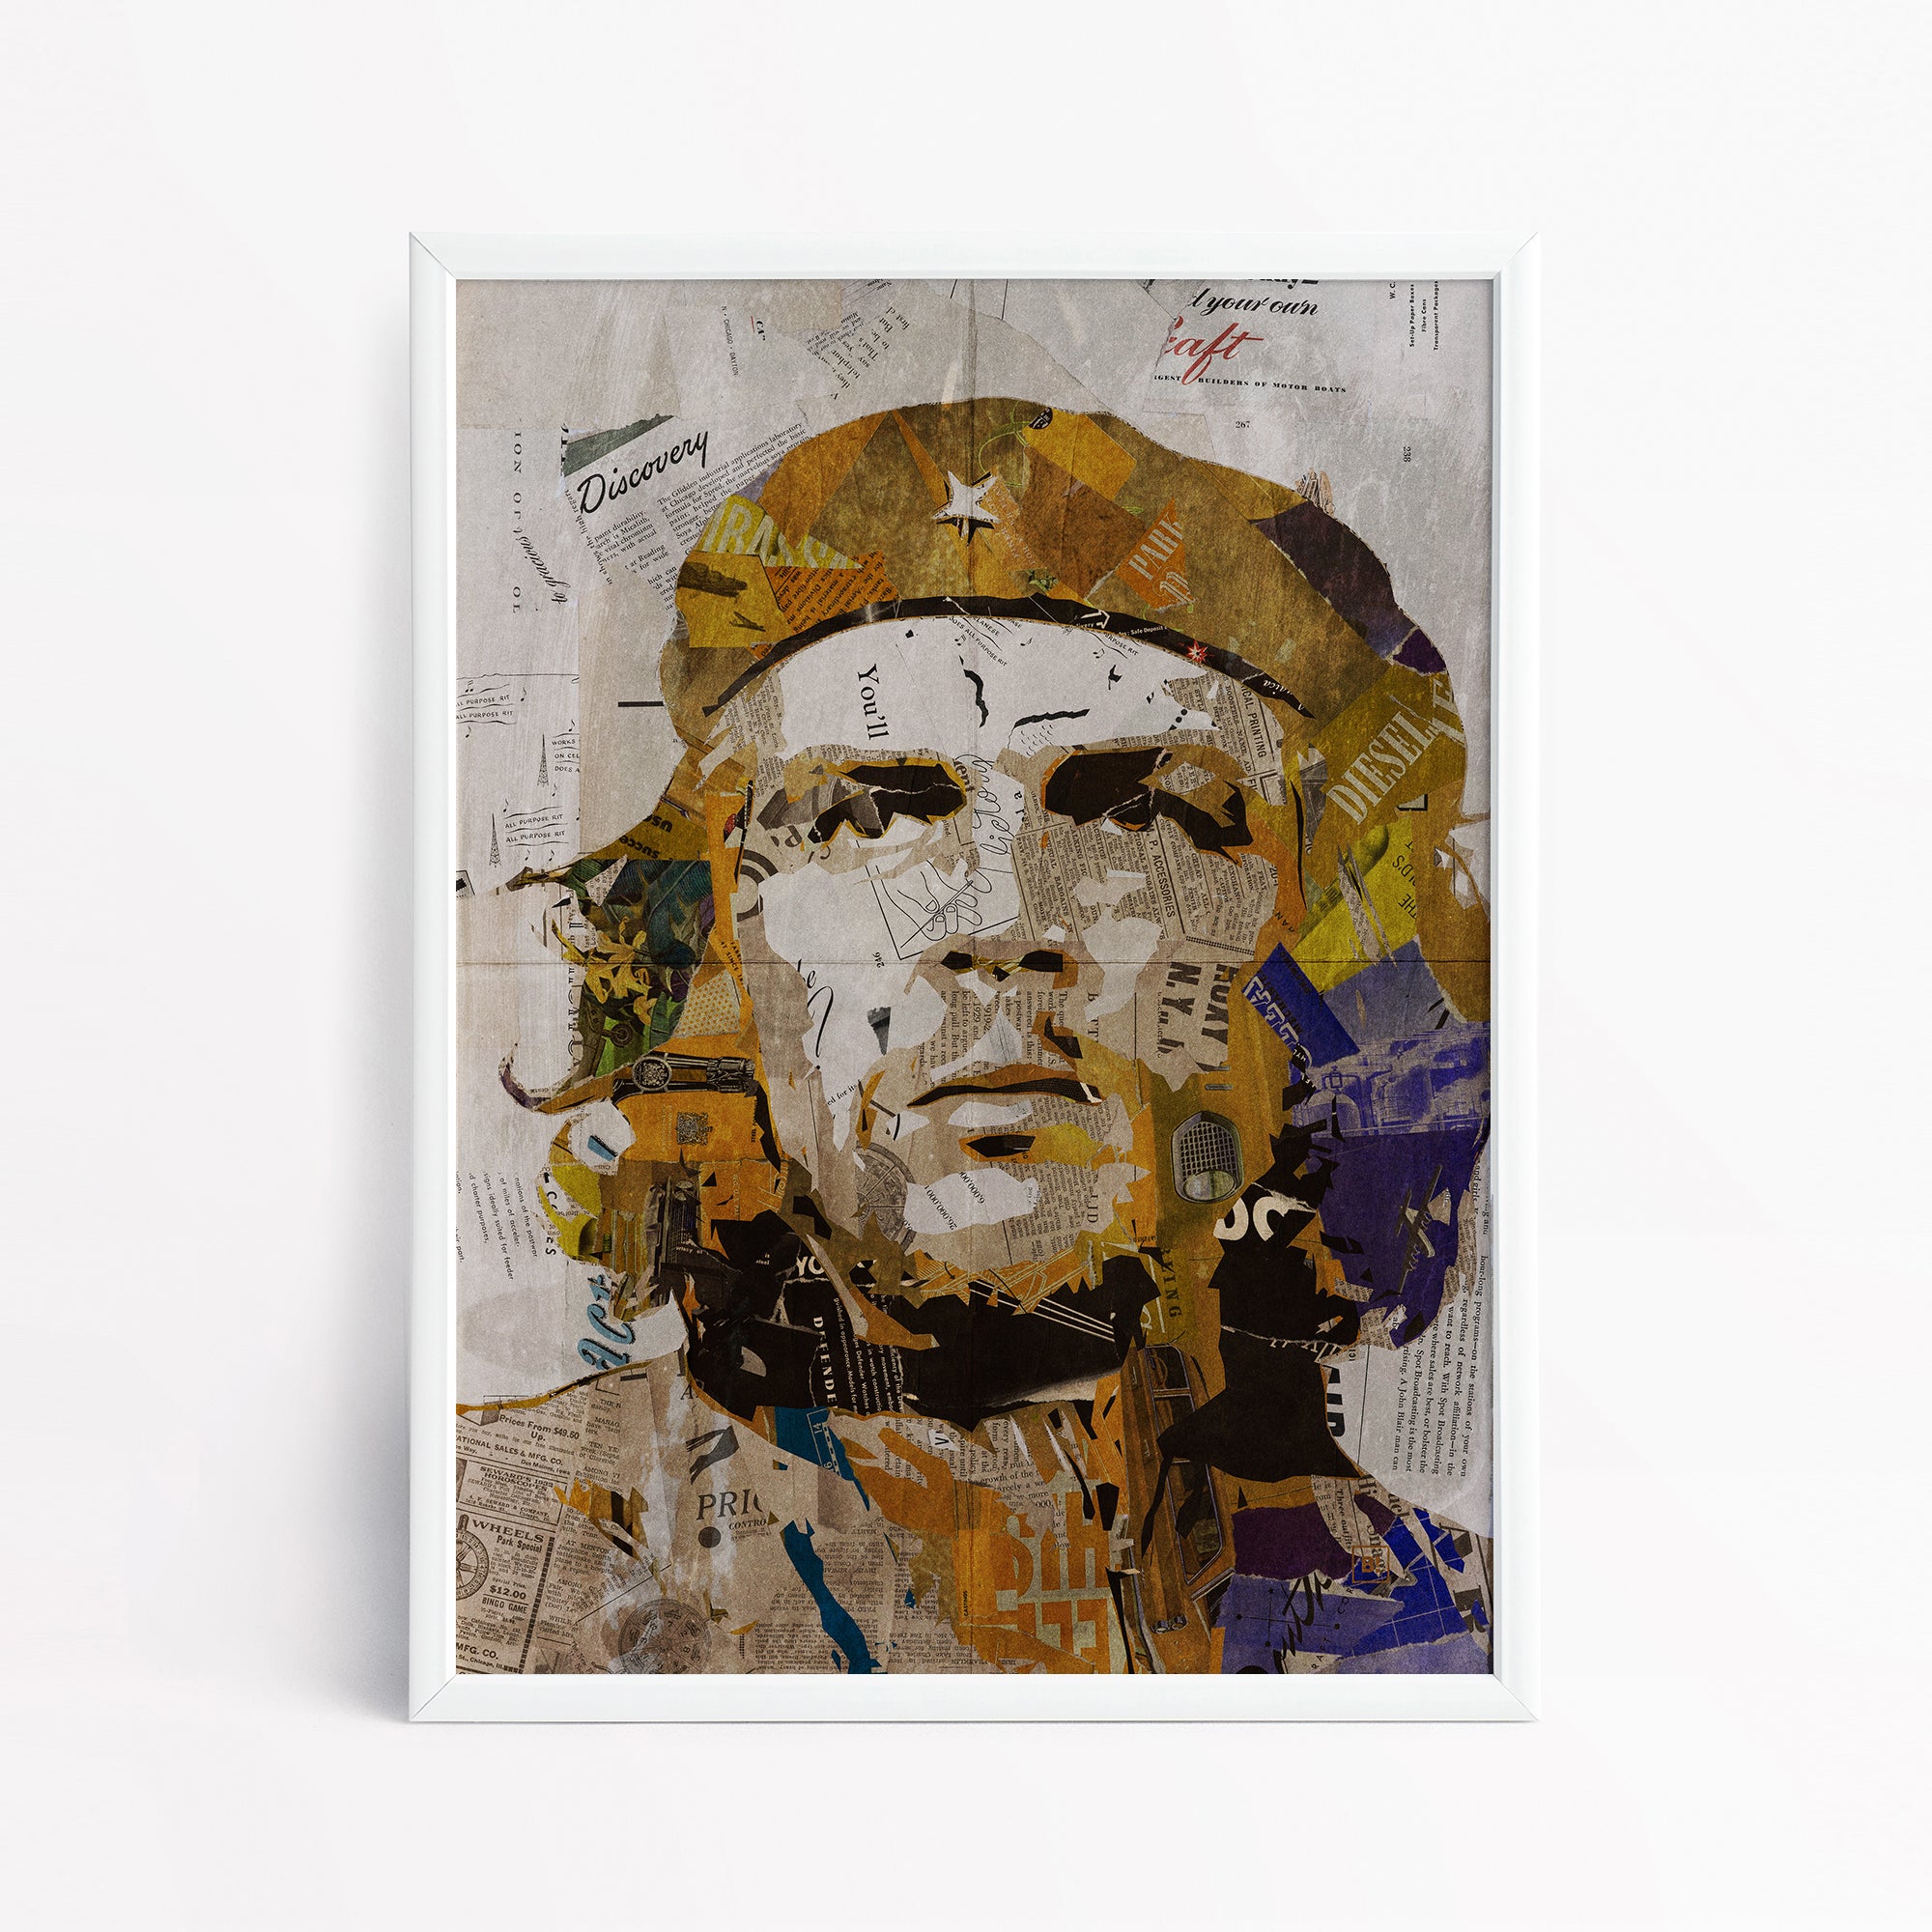 Be inspired by our iconic collage portrait art print of Che Guevara. This artwork has been printed using the giclée process on archival acid-free paper and is presented in a sleek white frame, showcasing its timeless beauty in every detail.